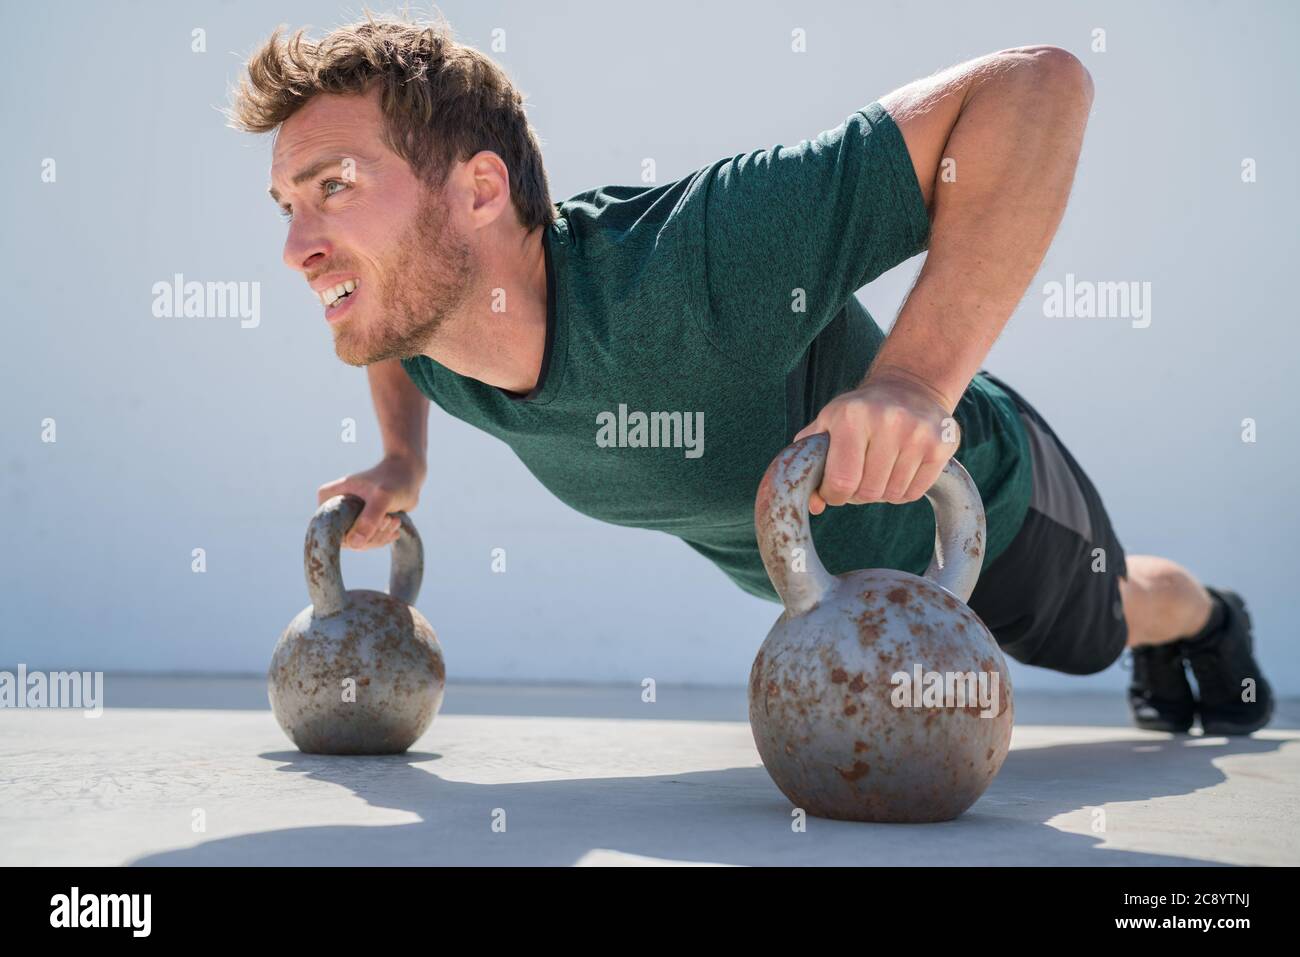 Fitness gym pushups man working out on kettlebells Stock Photo